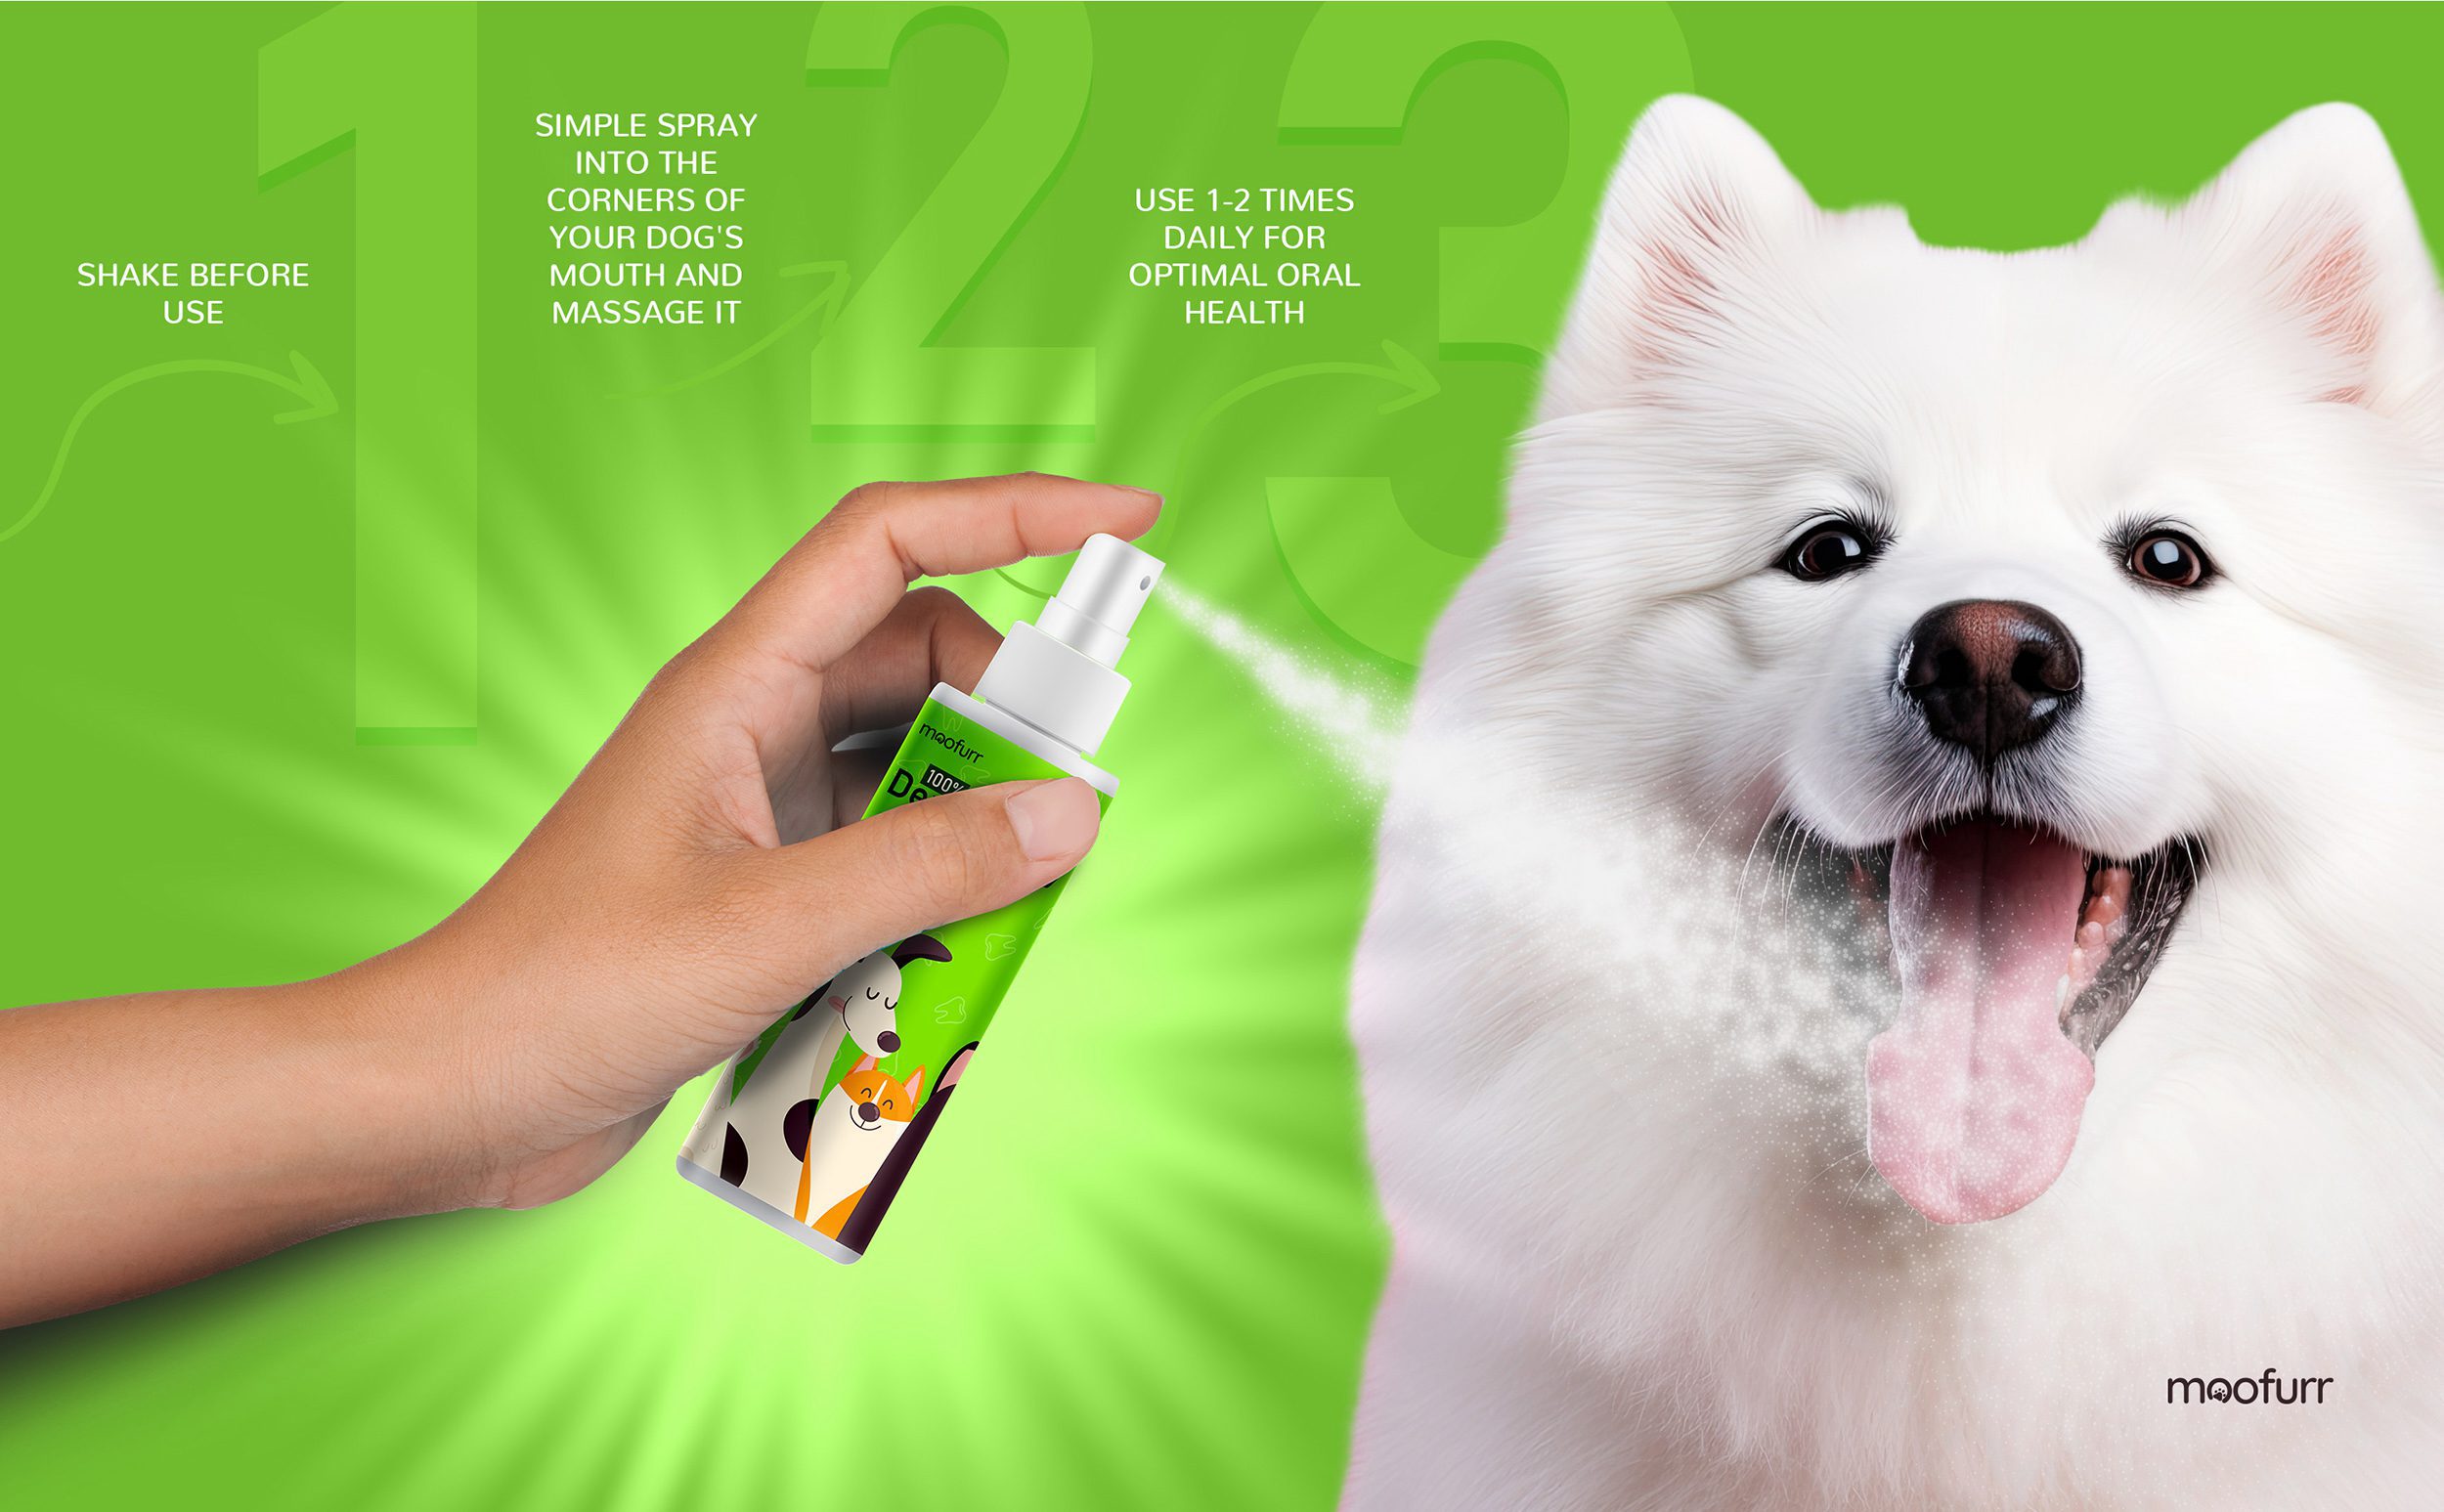 Dental Gel For Dogs, Shake Before Use, Spray into Corners of your Dogs Mouth